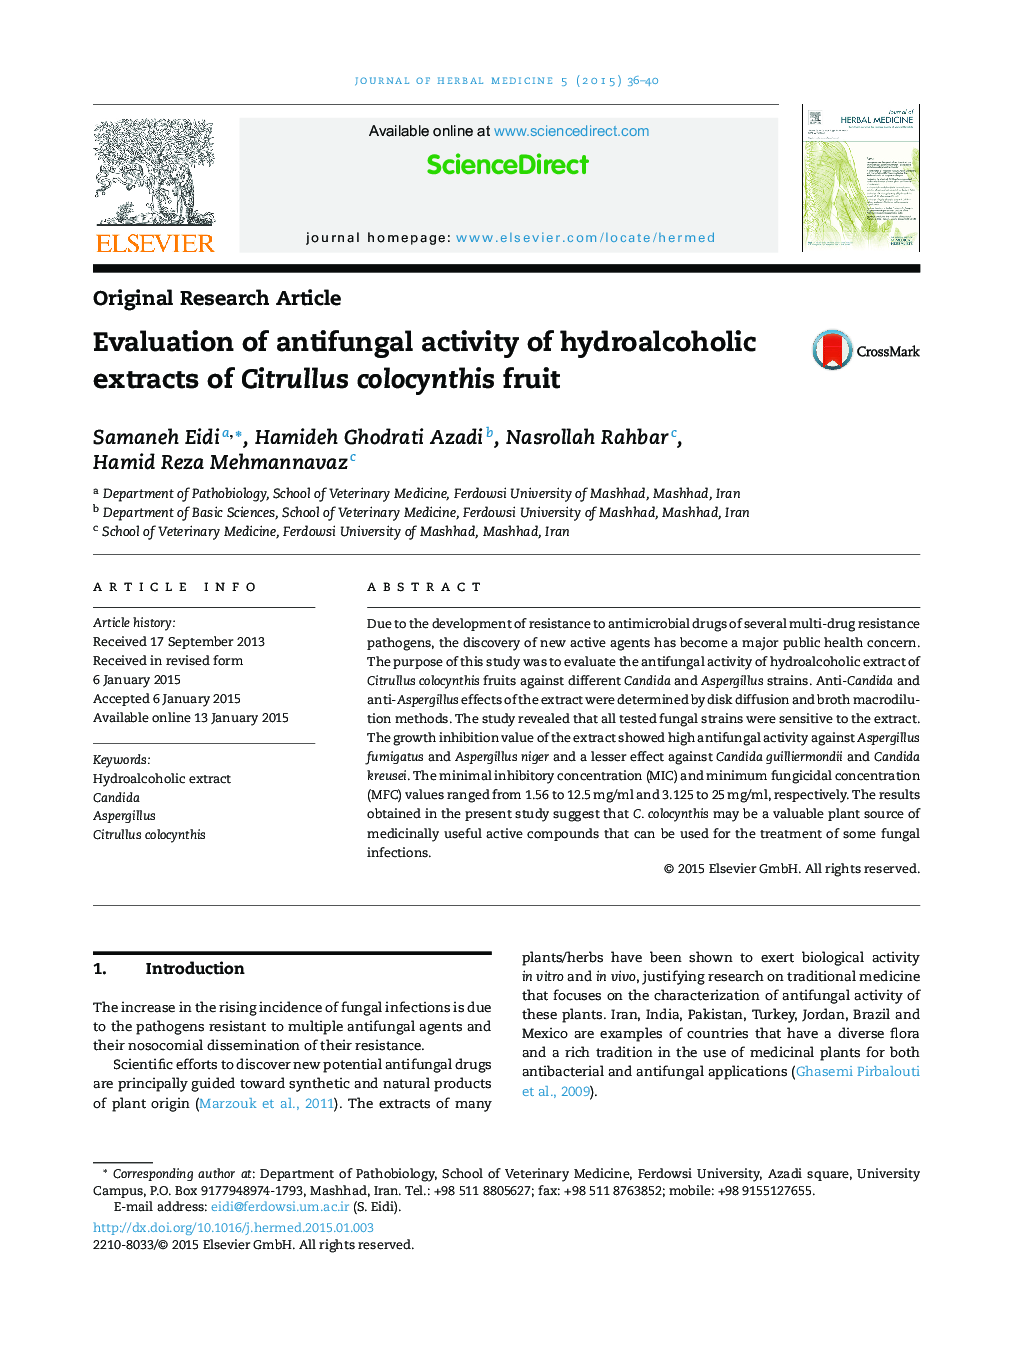 Evaluation of antifungal activity of hydroalcoholic extracts of Citrullus colocynthis fruit